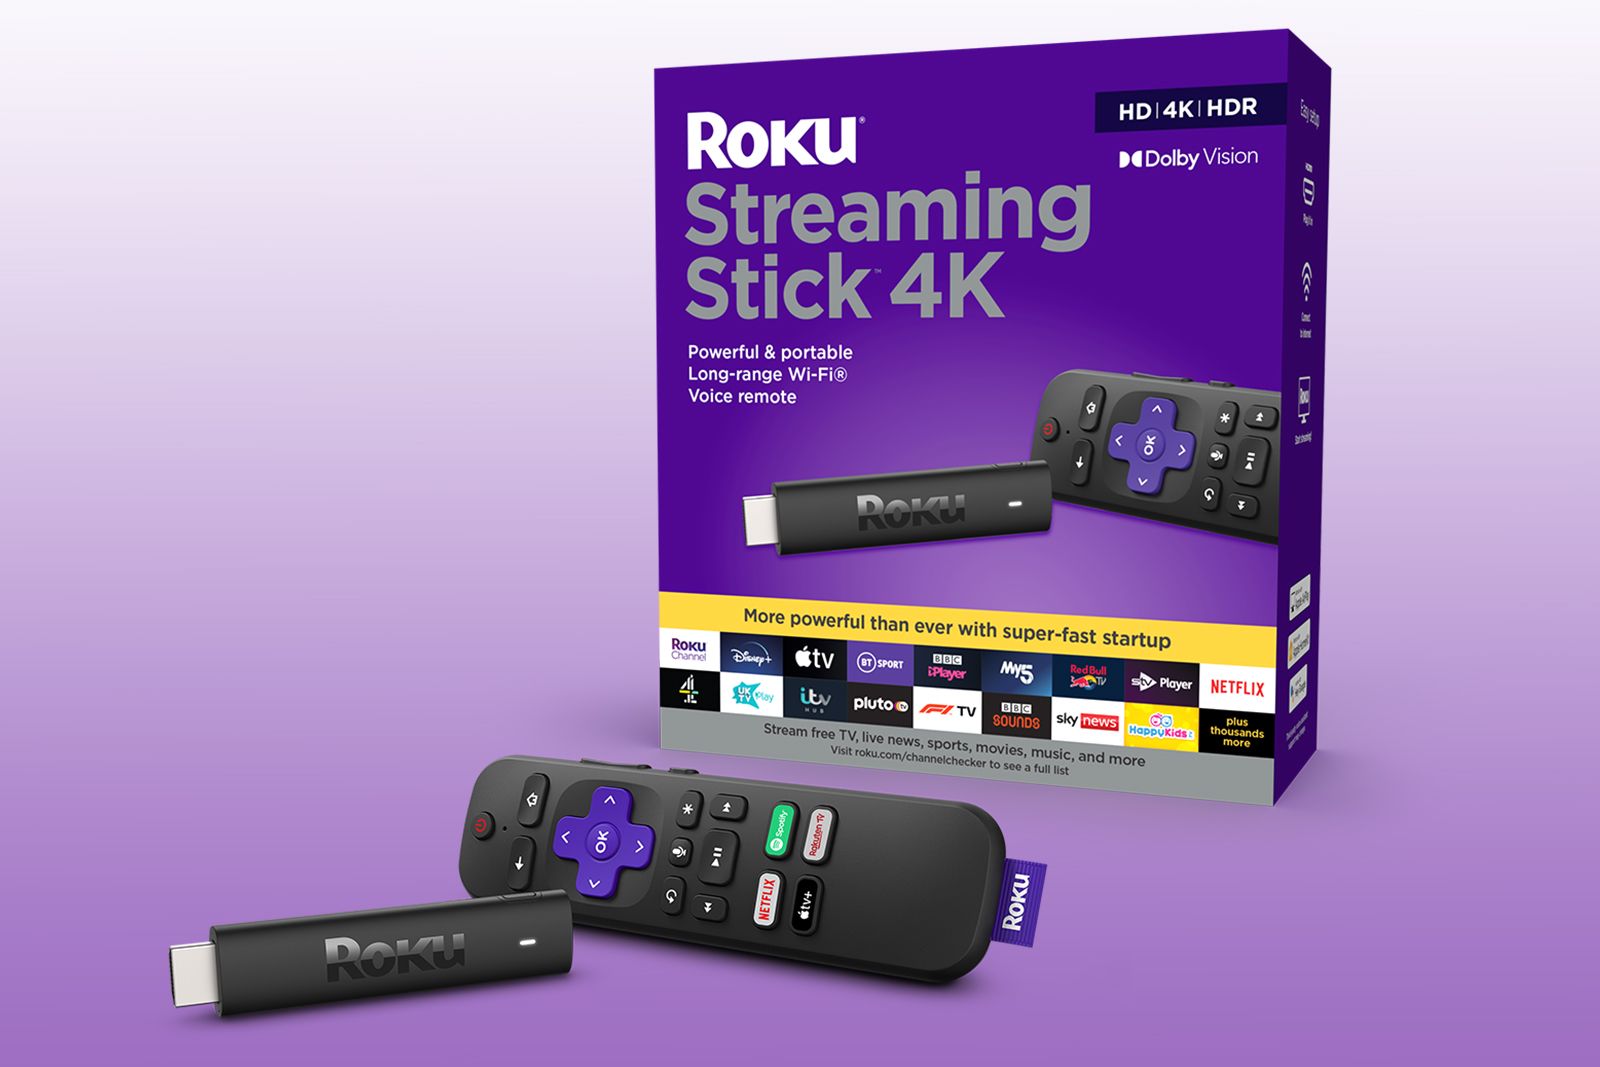 New Roku Streaming Stick 4K coming UK, adds Dolby